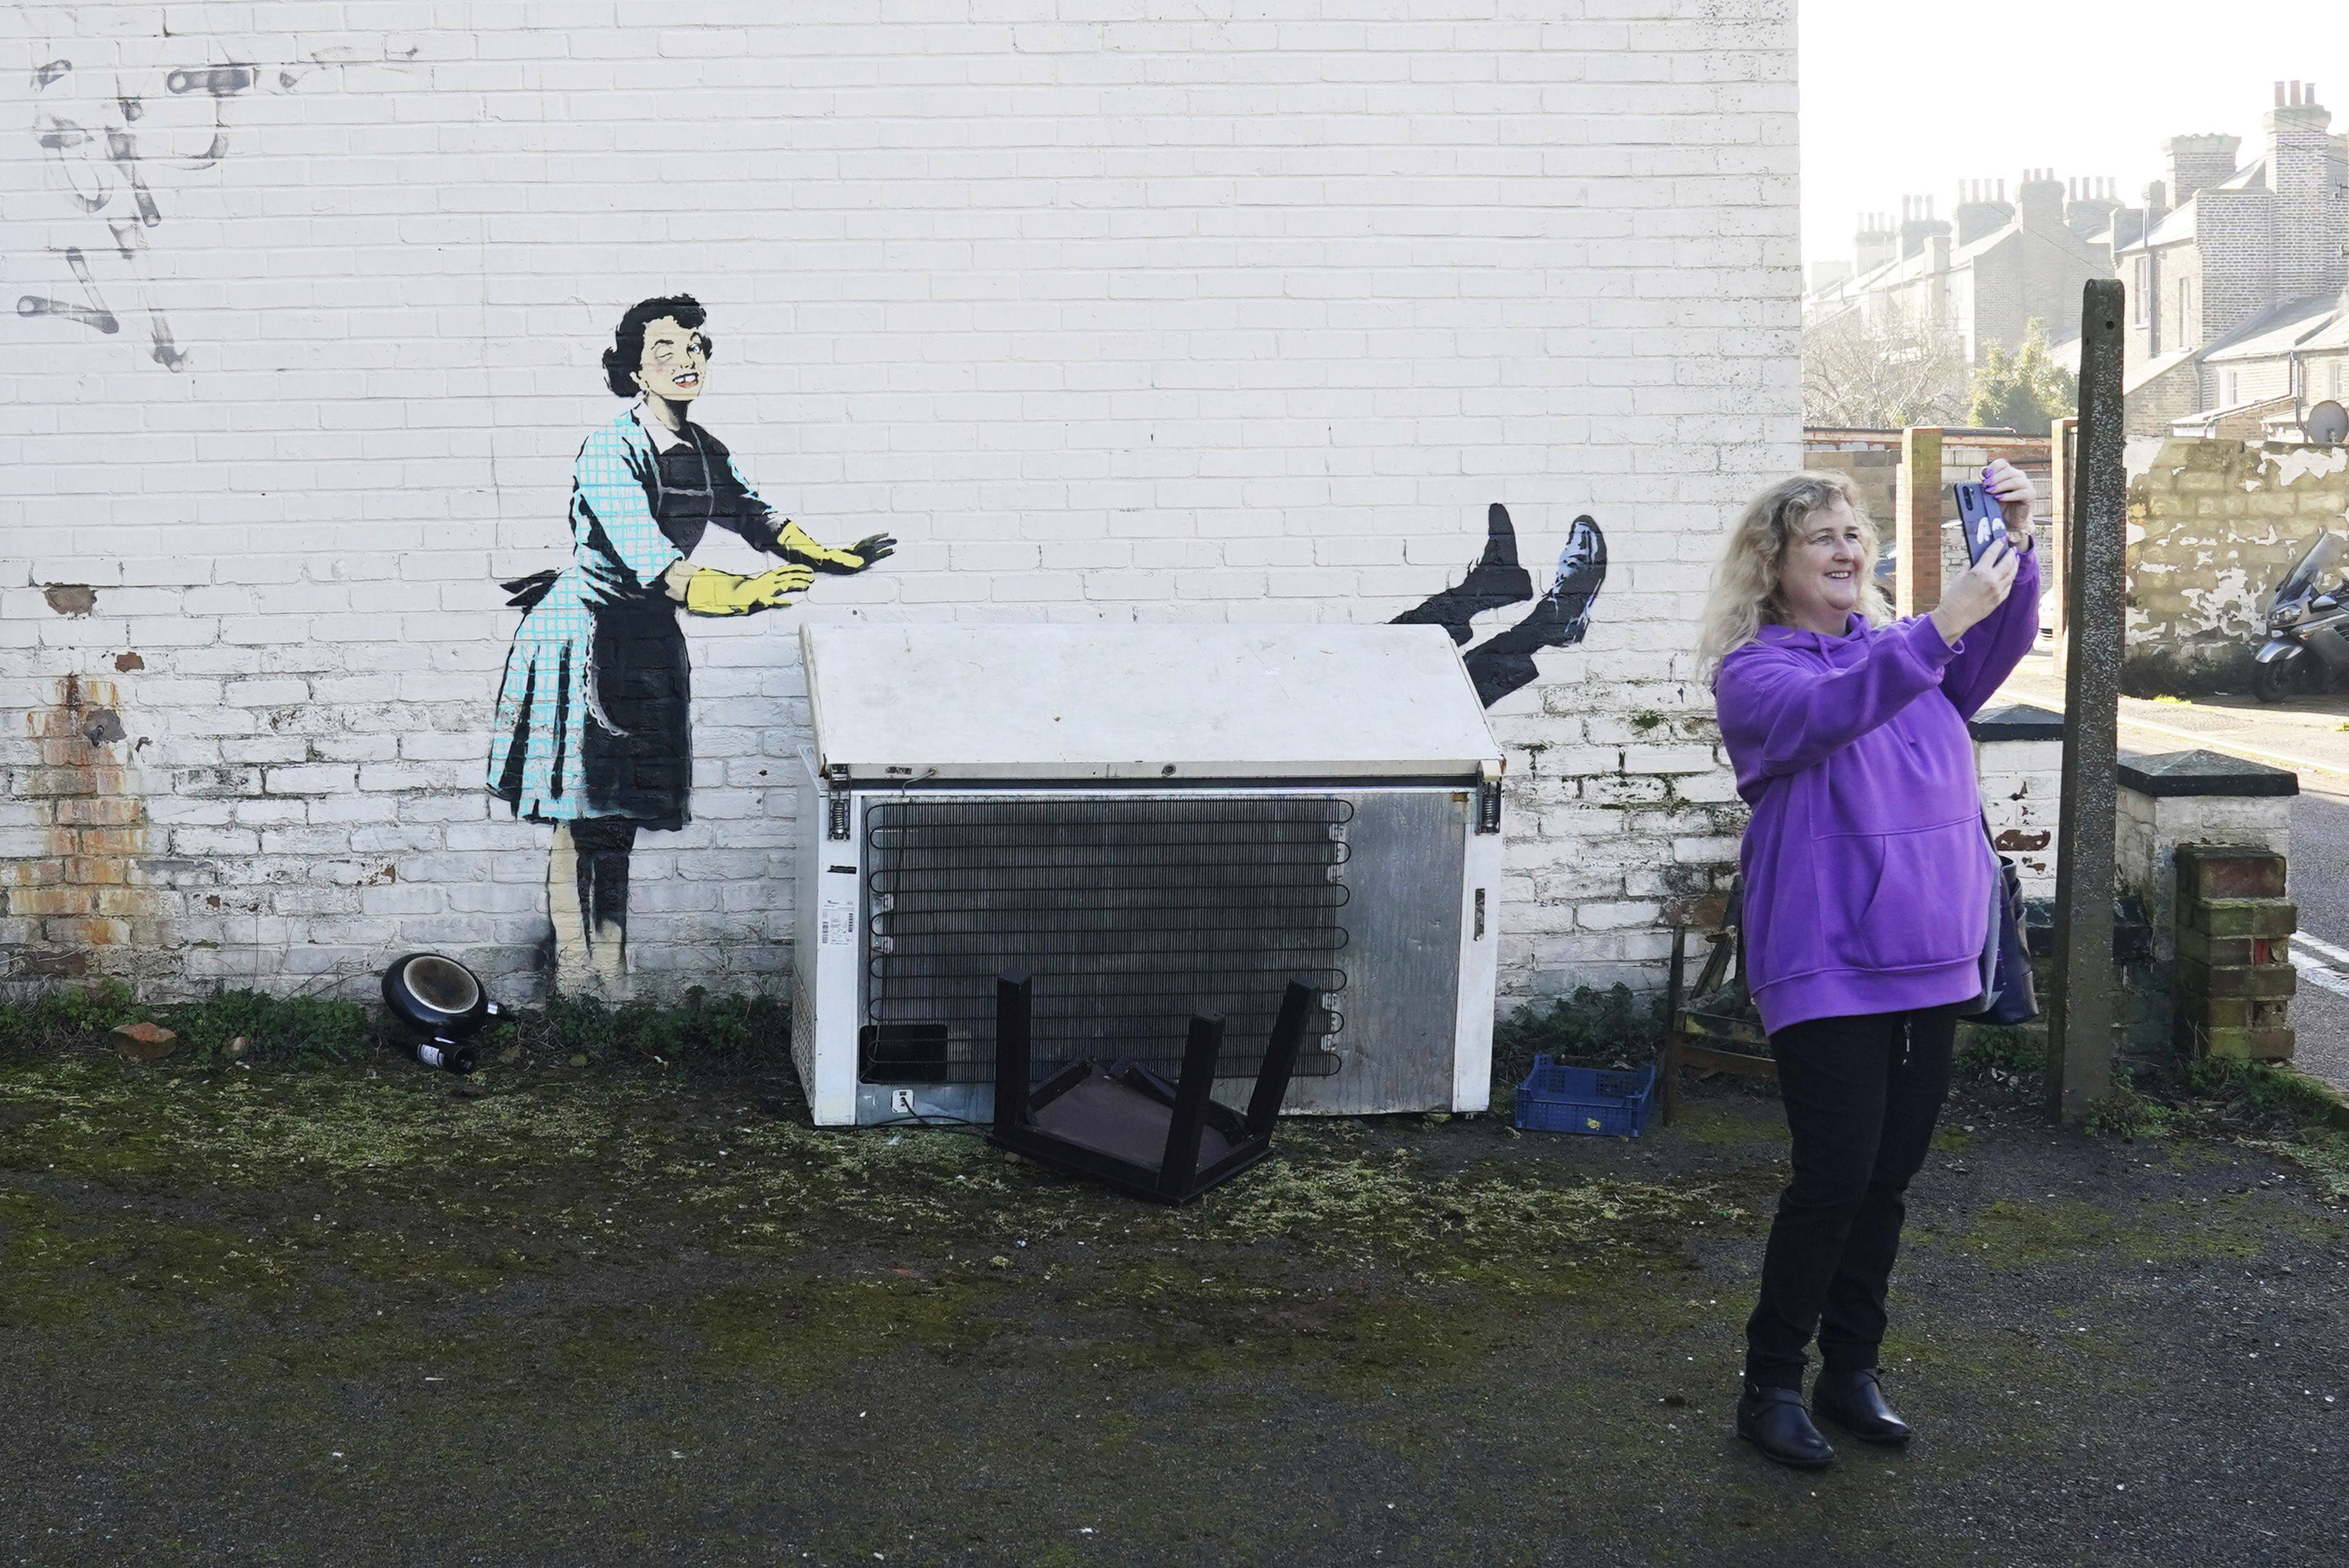 A woman takes a picture with a new artwork by street artist Banksy, titled “Valentine’s Day Mascara” in Margate, England on Tuesday. Photo: PA via AP